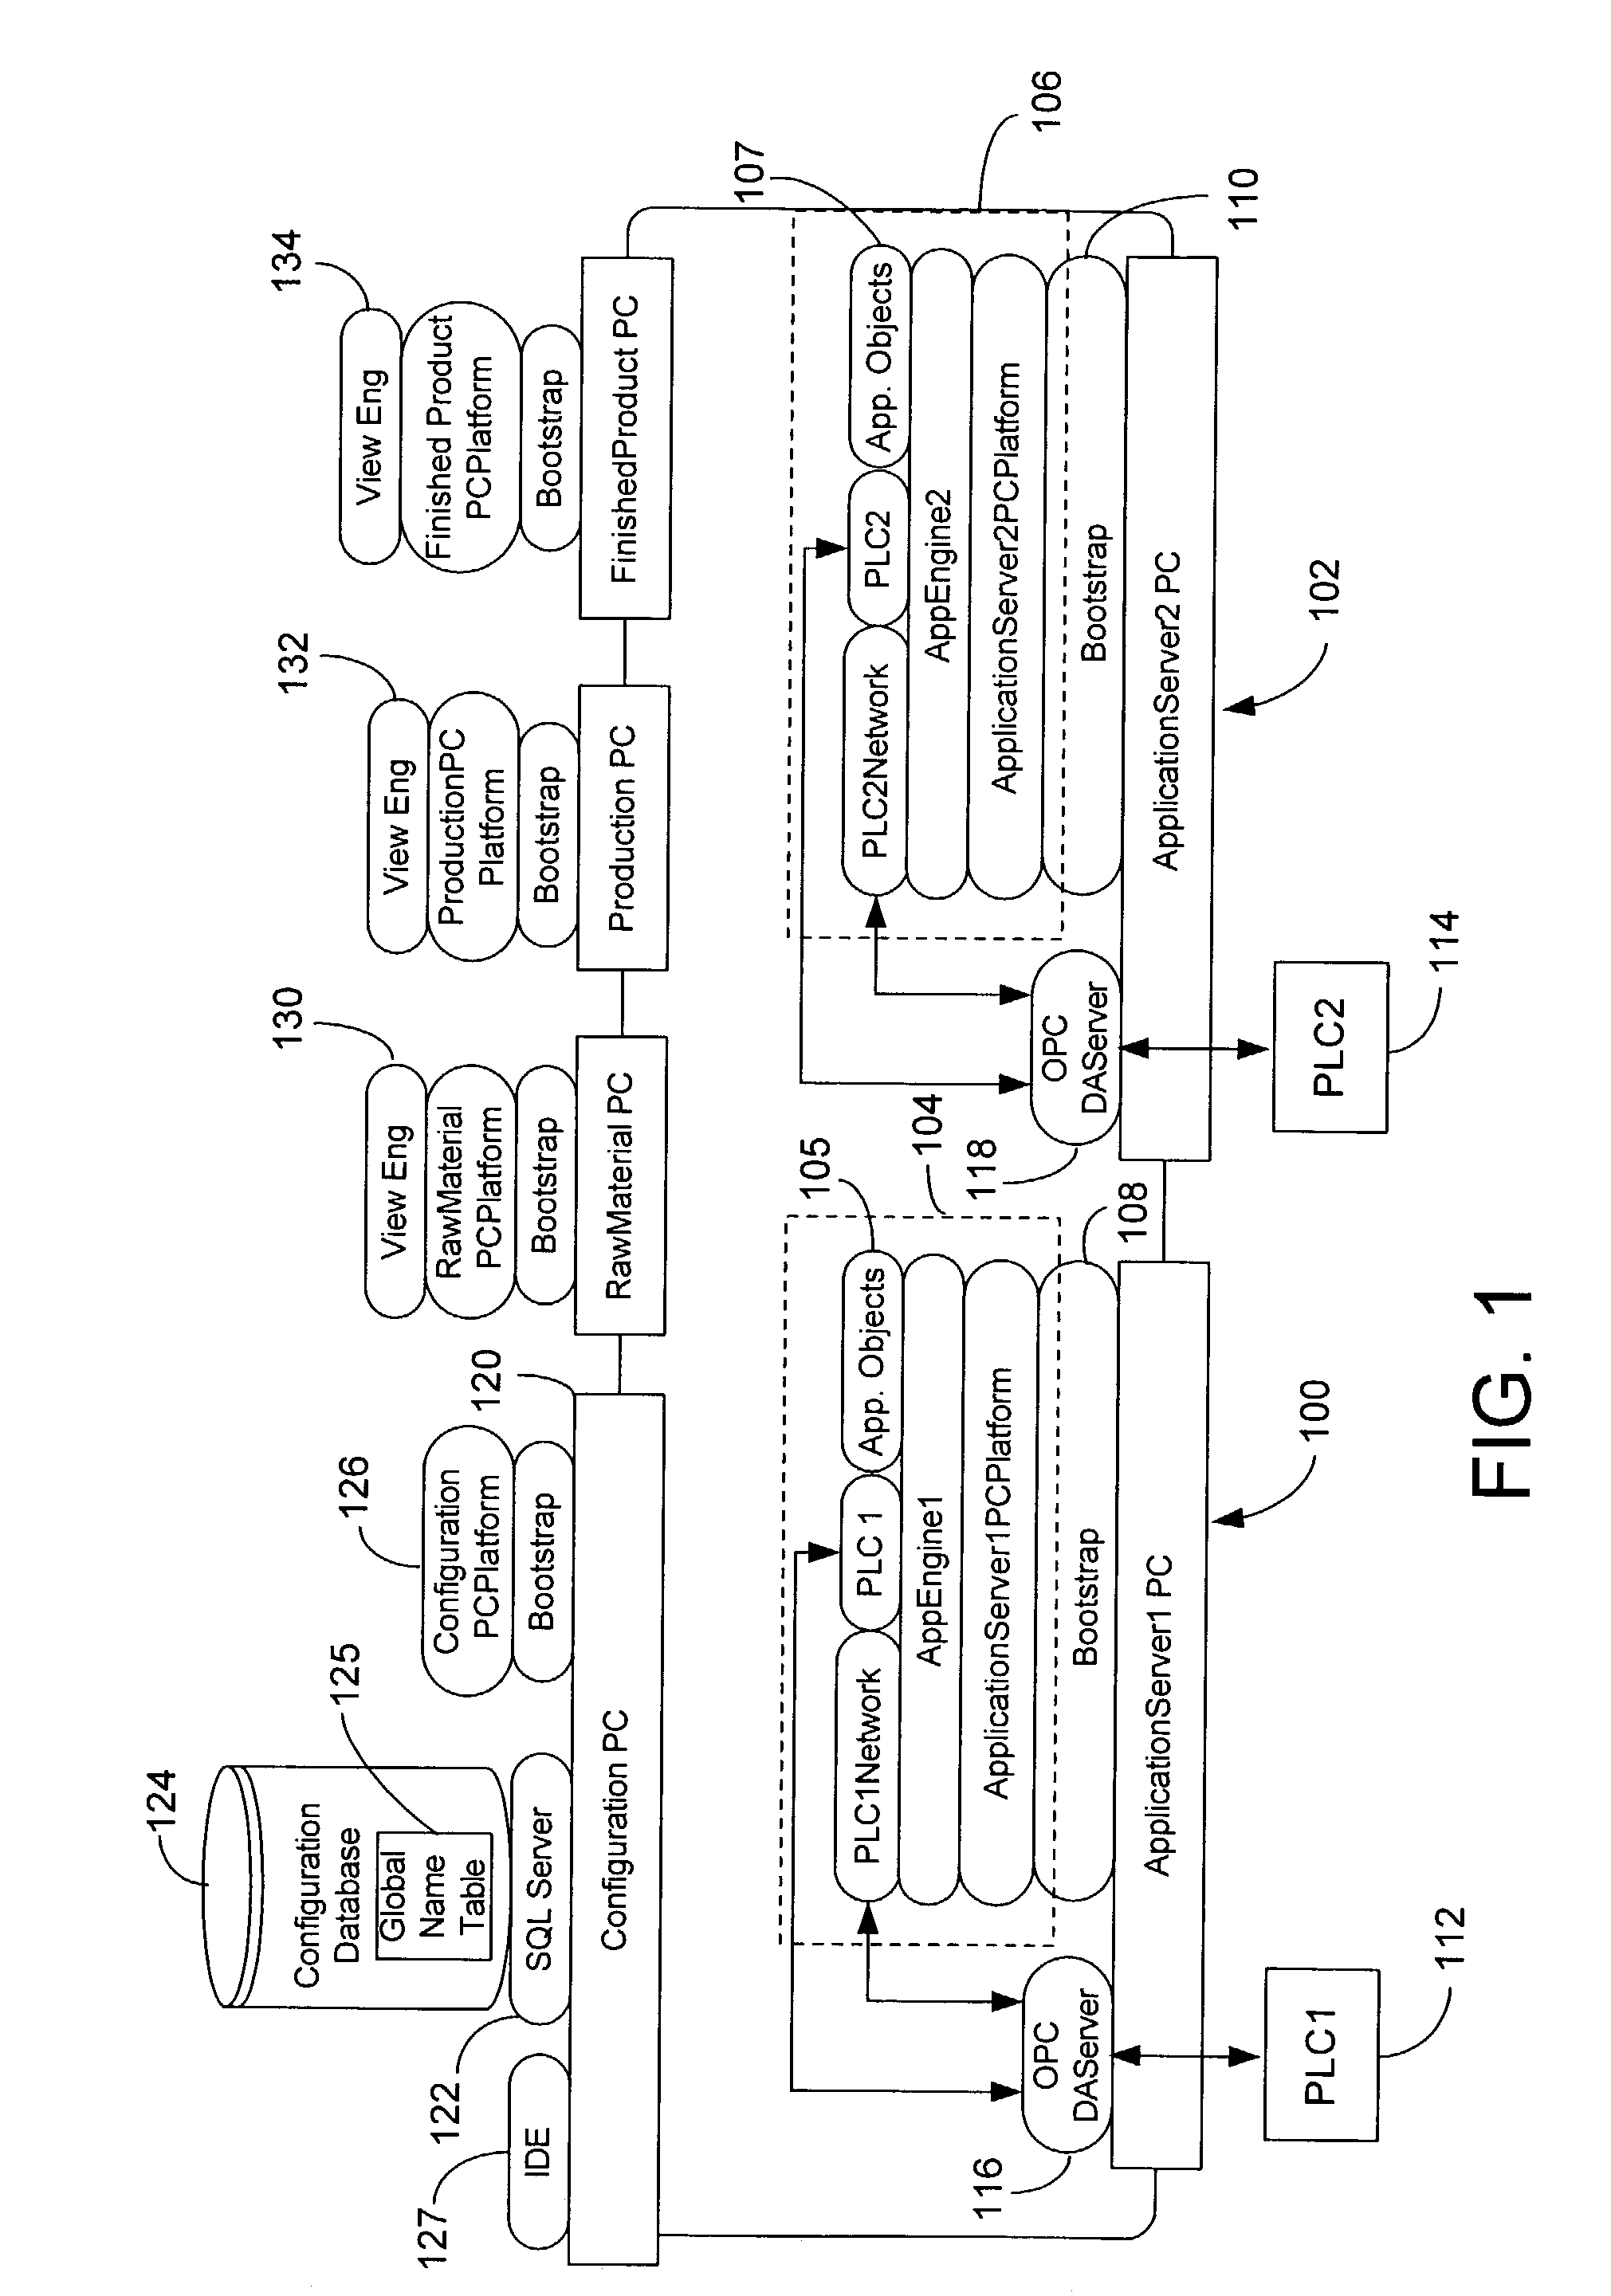 Process control script development and execution facility supporting multiple user-side programming languages